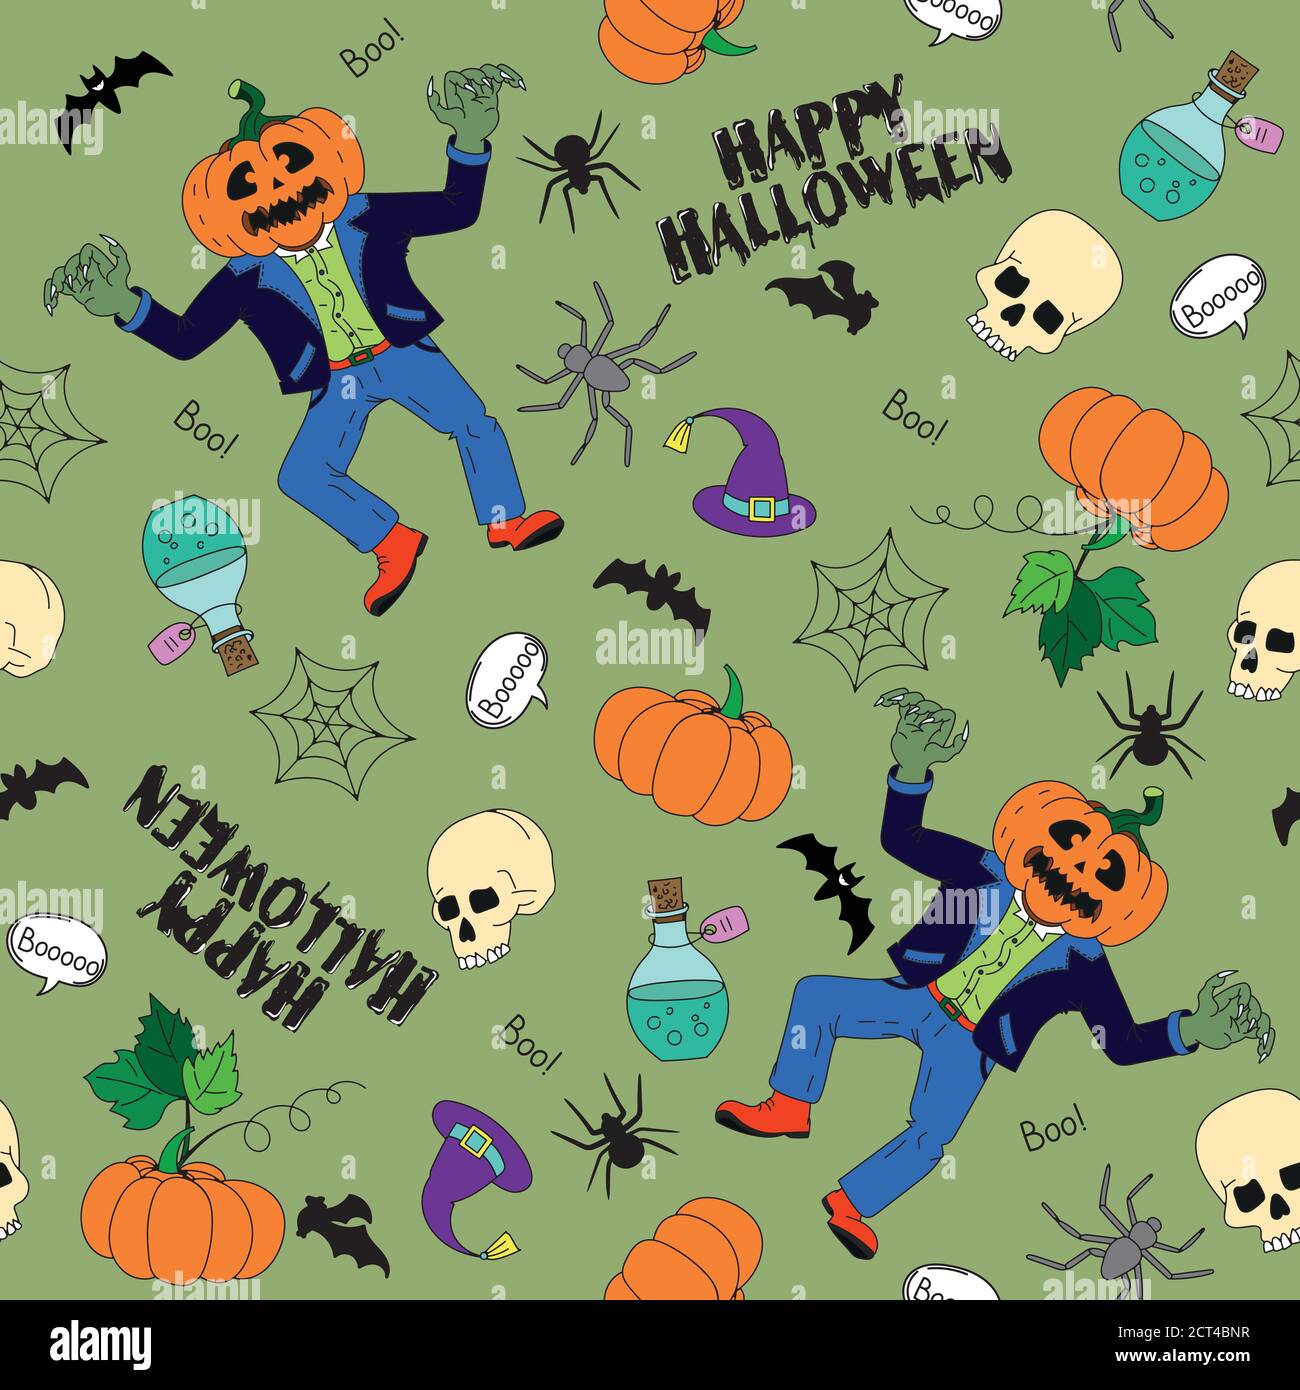 Vector seamless pattern for Halloween. Pumpkin, ghost, bat, candy, and other items on Halloween theme. Bright cartoon pattern for Halloween Stock Vector